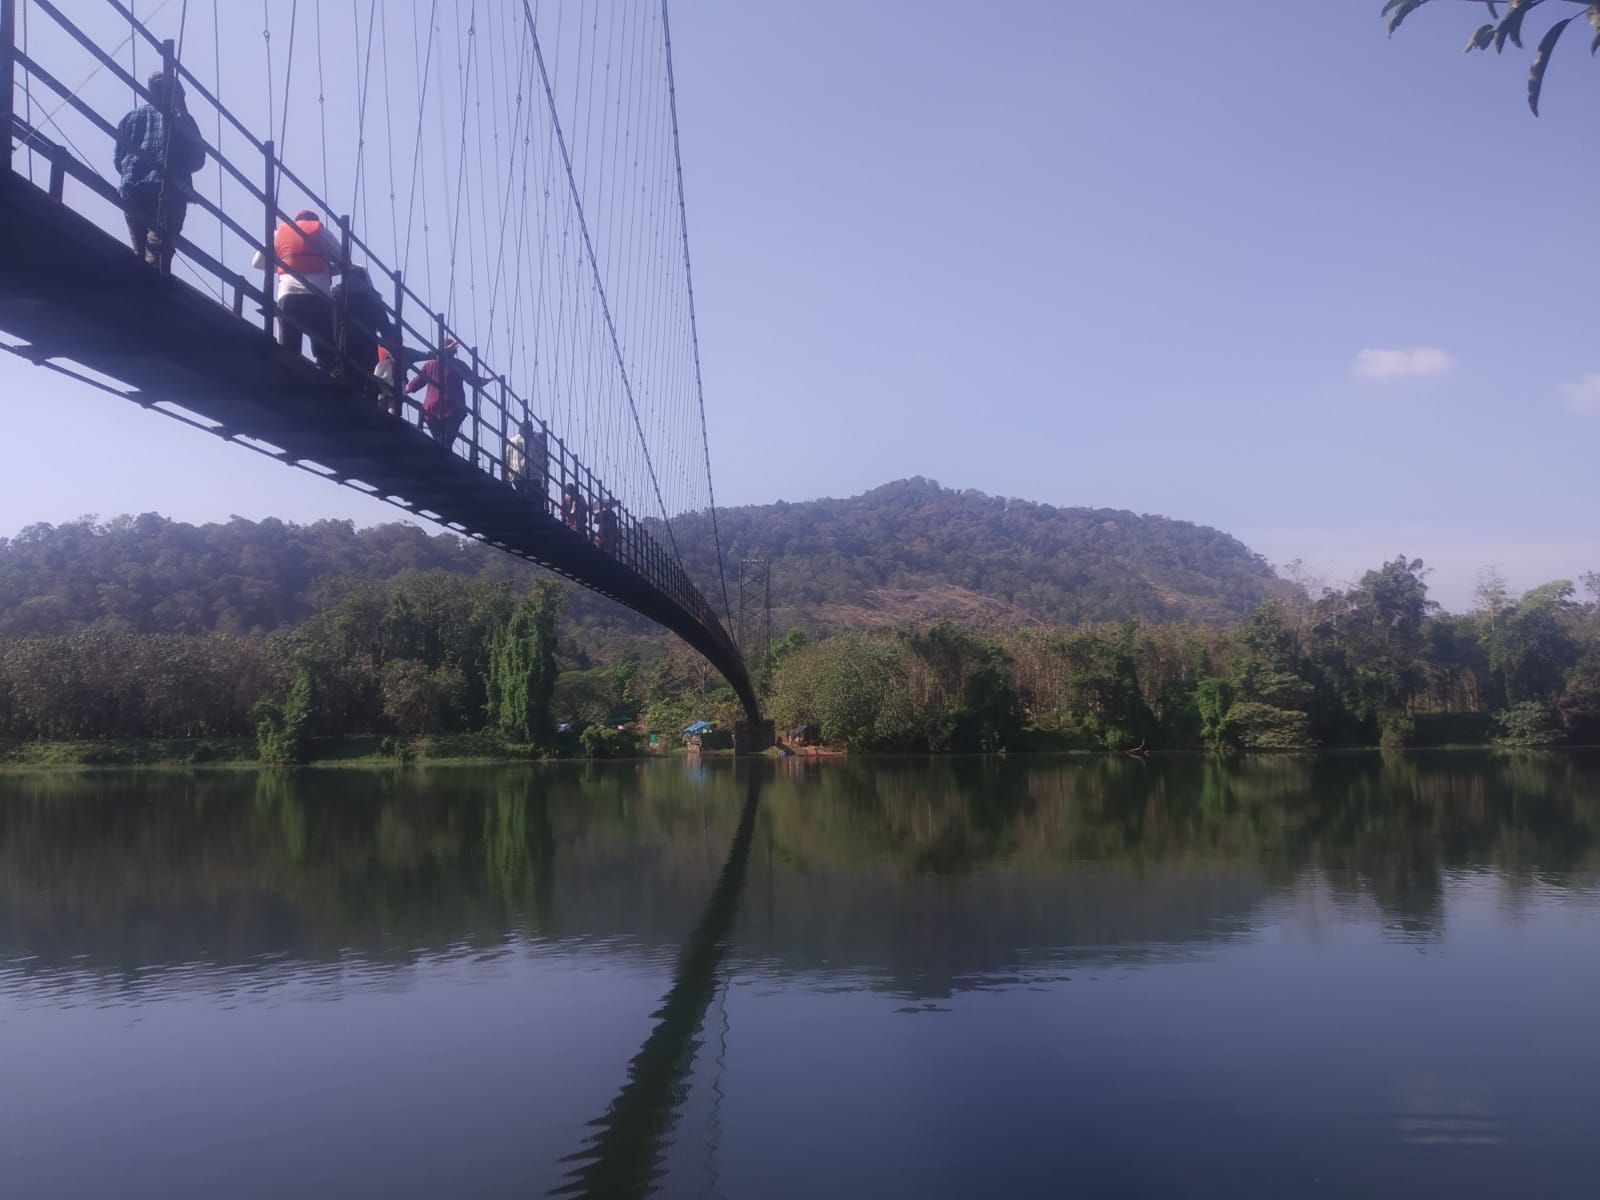 This is the view of the “Inchathotty - Hanging Bridge" from top of the bridge.